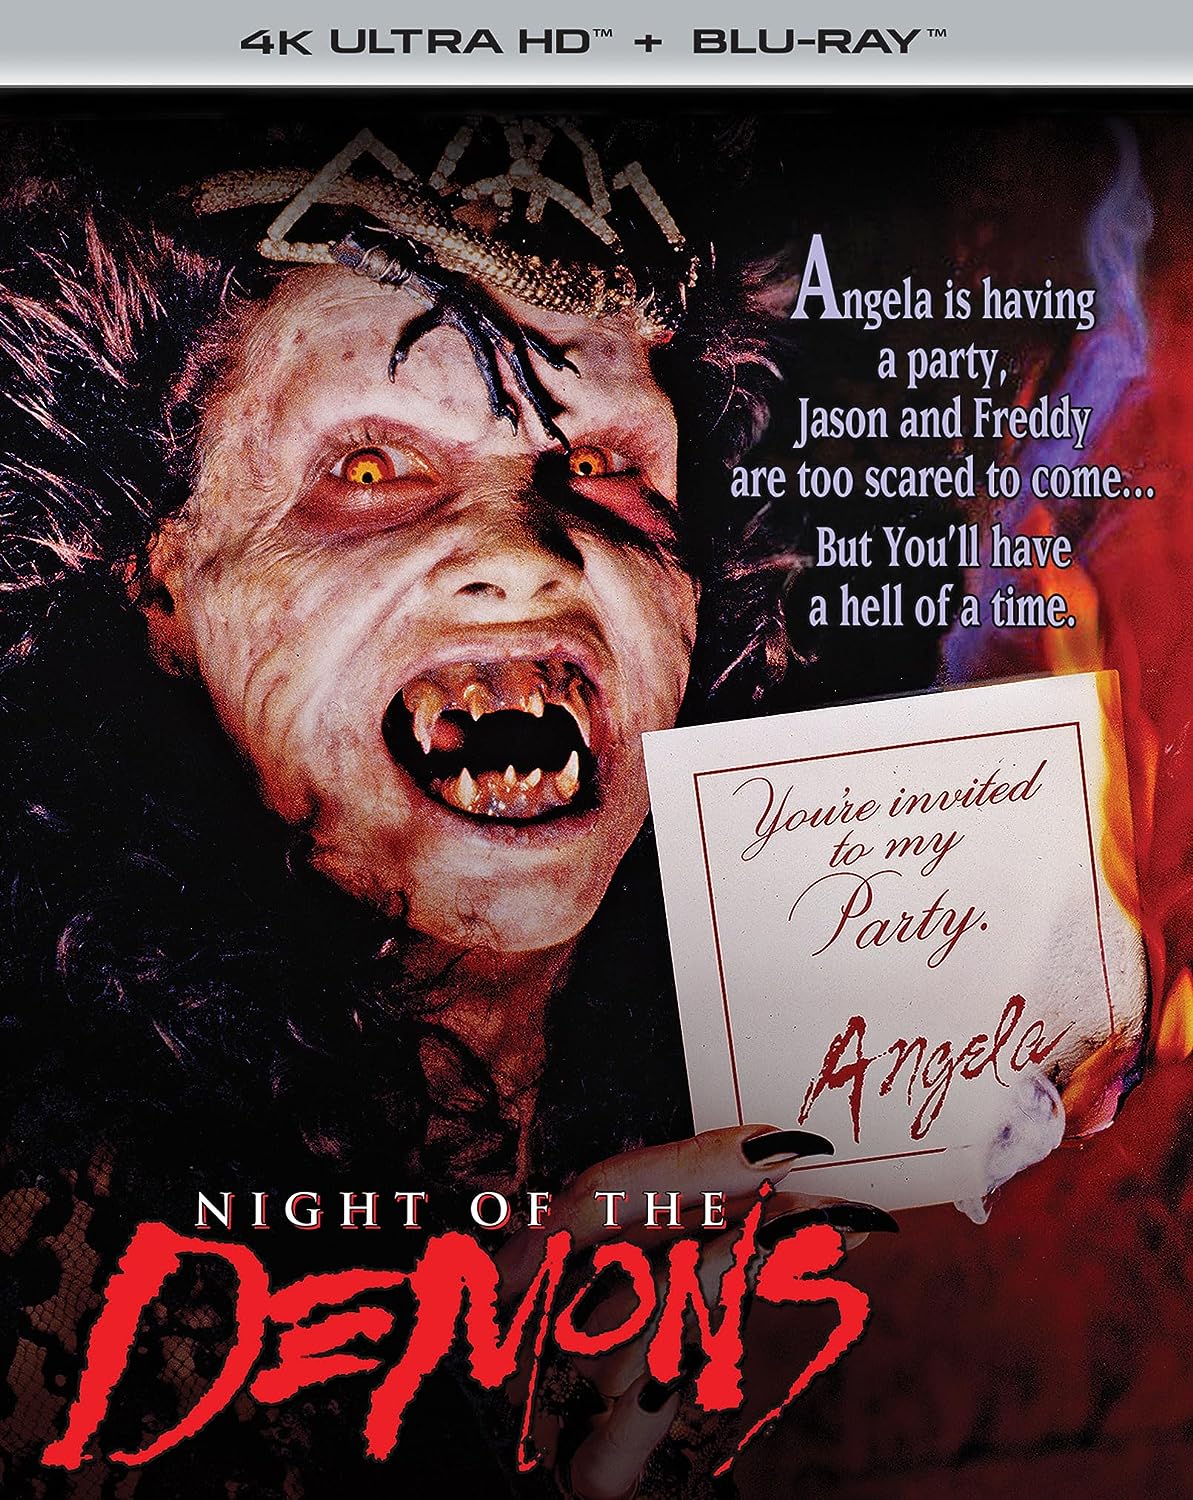 NIGHT OF THE DEMONS (COLLECTOR'S EDITION) 4K UHD/BLU-RAY